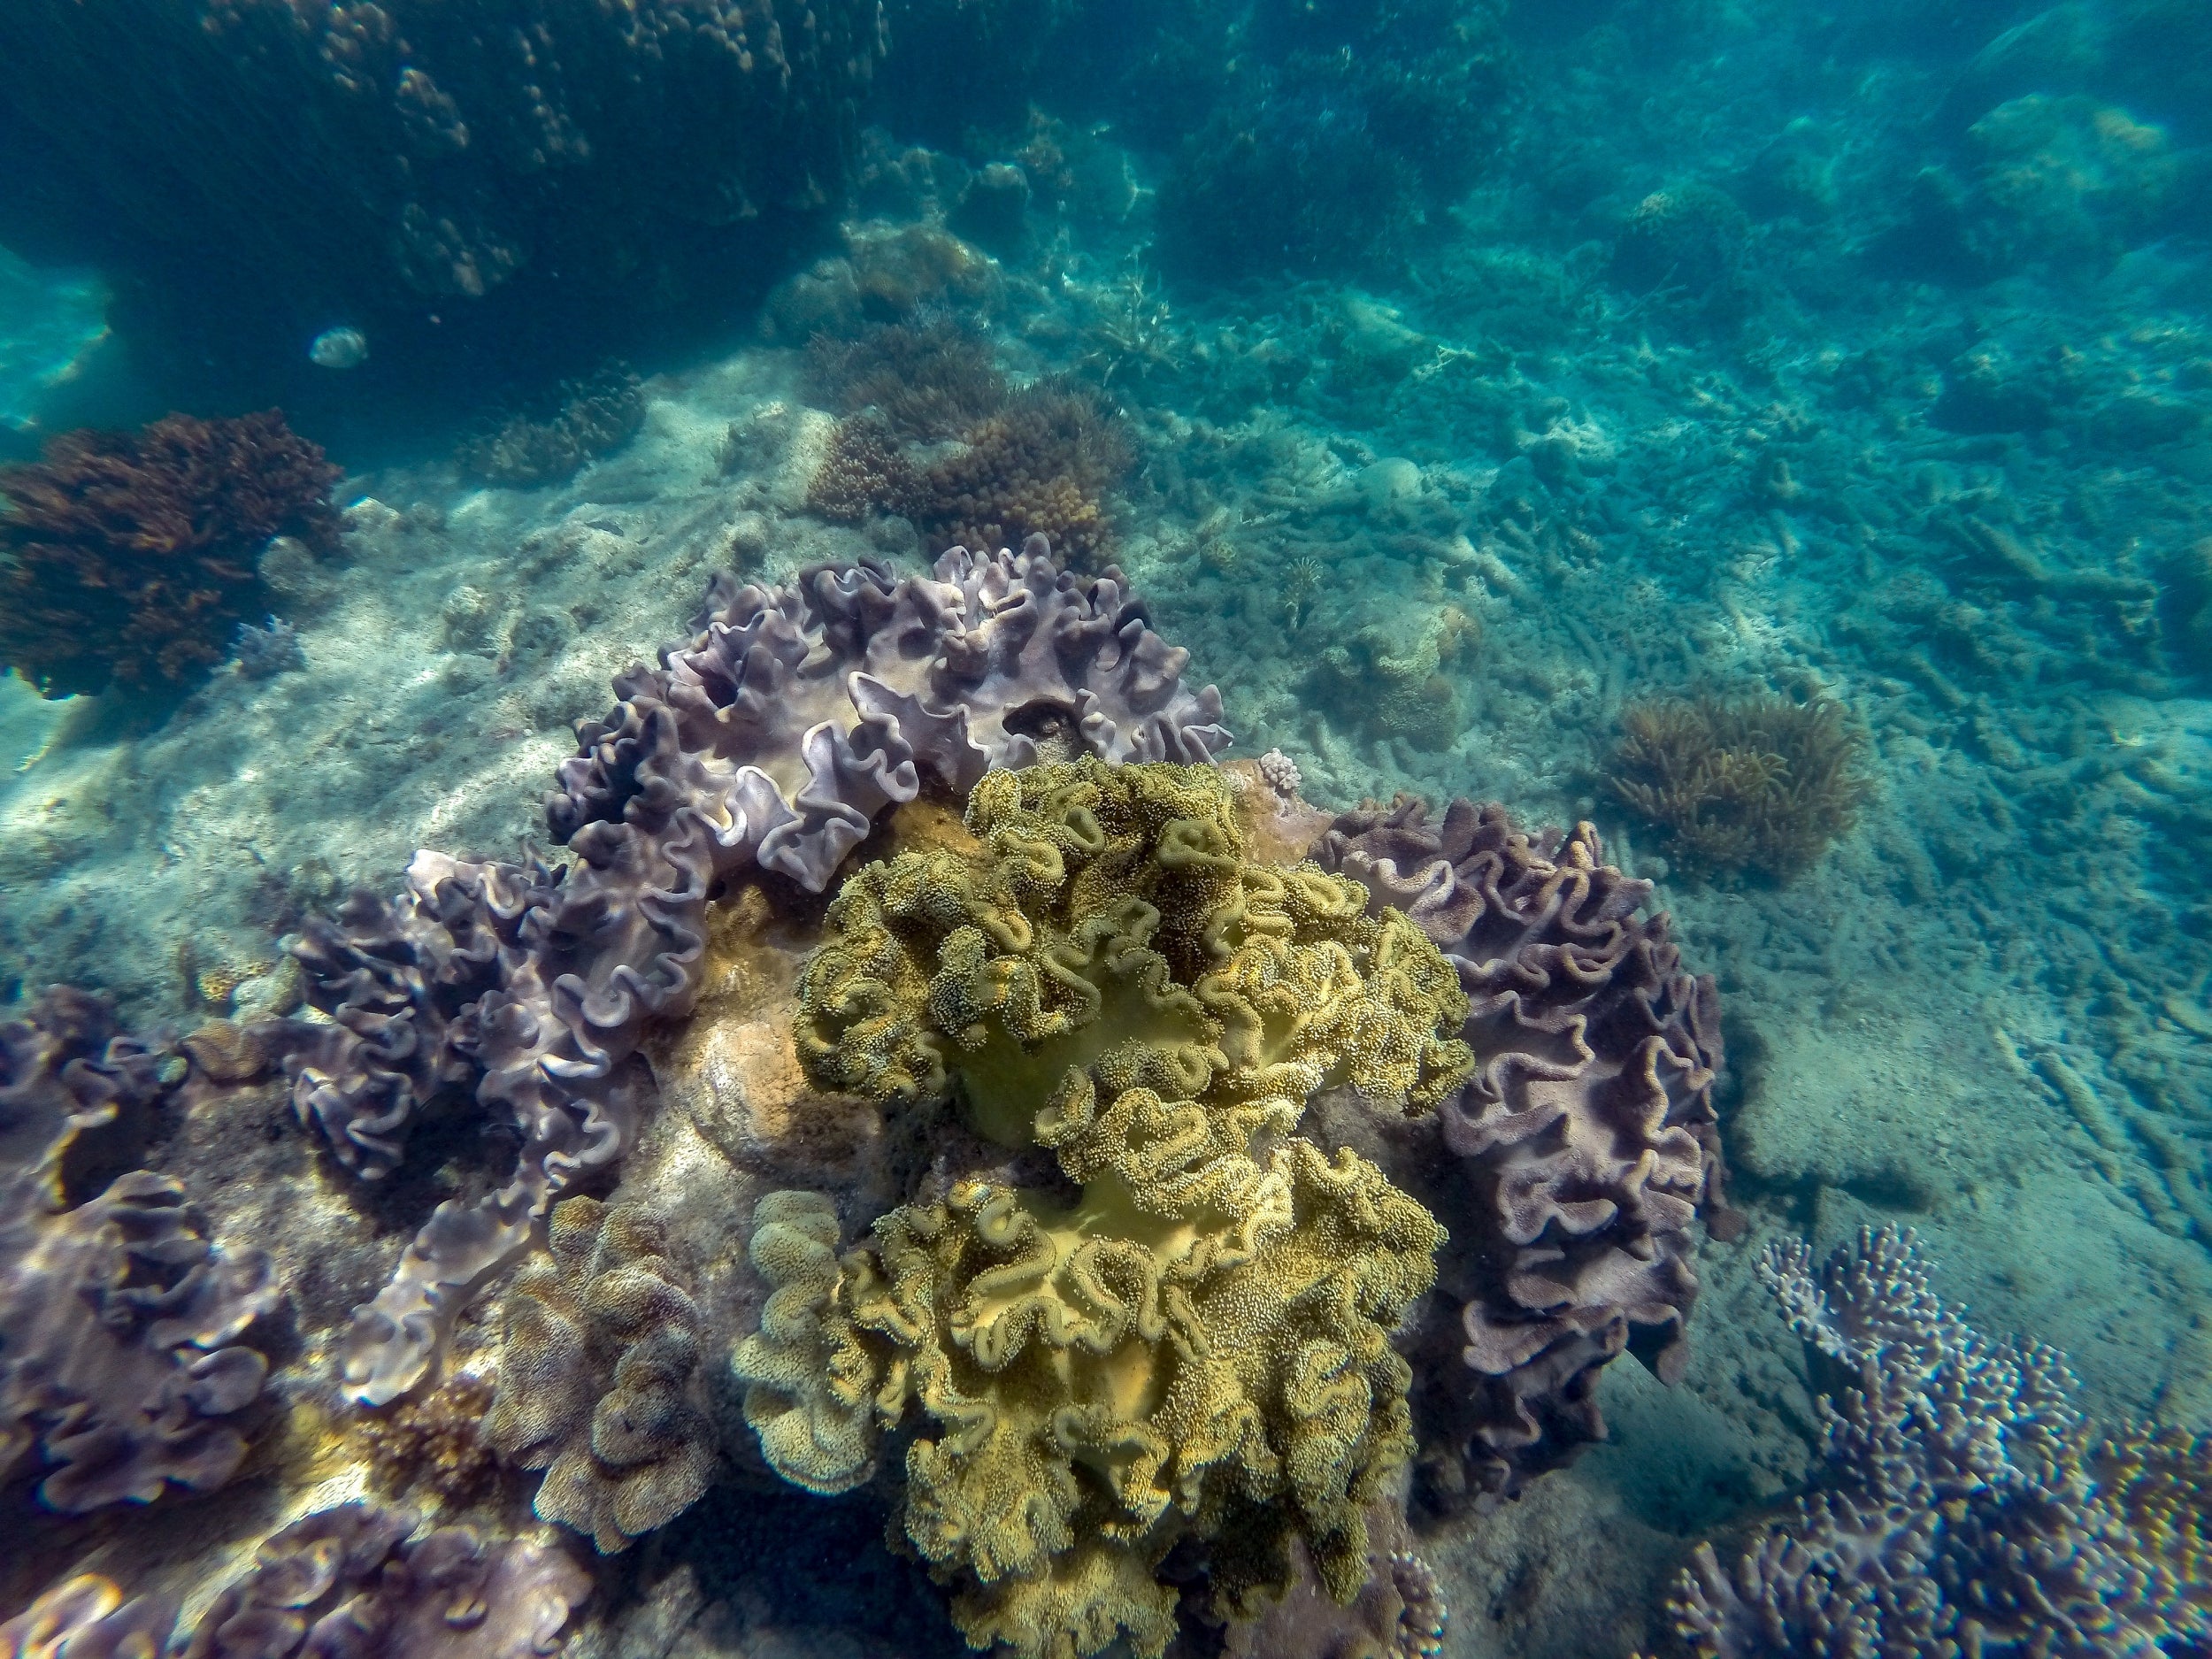 Colorful corals in shallow water at the Great Barrier Reef